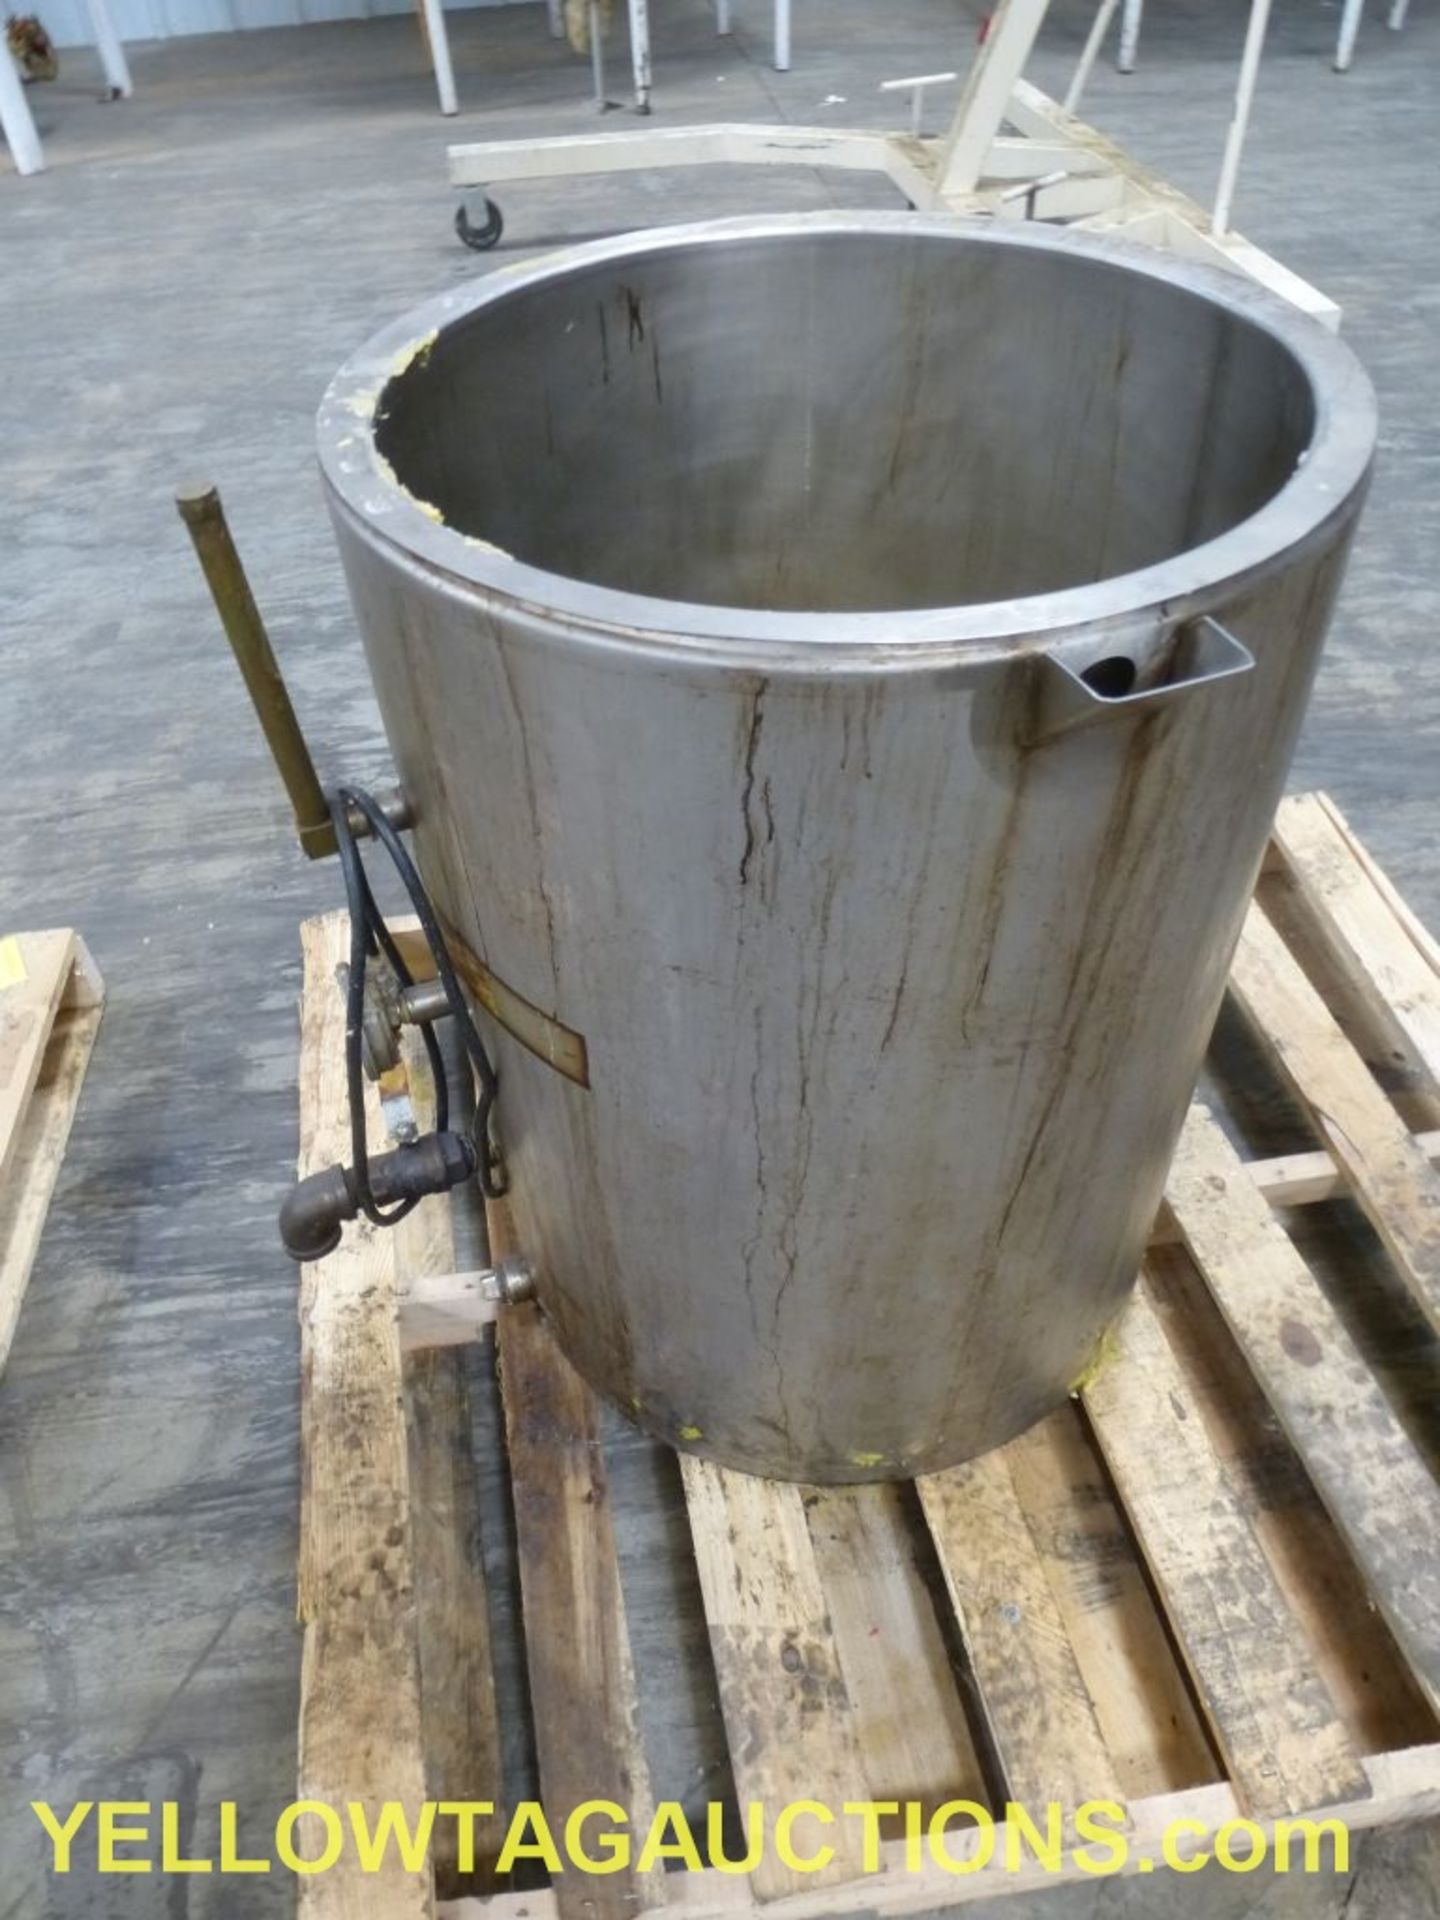 Stainless Steel Jacketed Melting Pot|Lot Loading Fee: $5.00 - Image 2 of 6